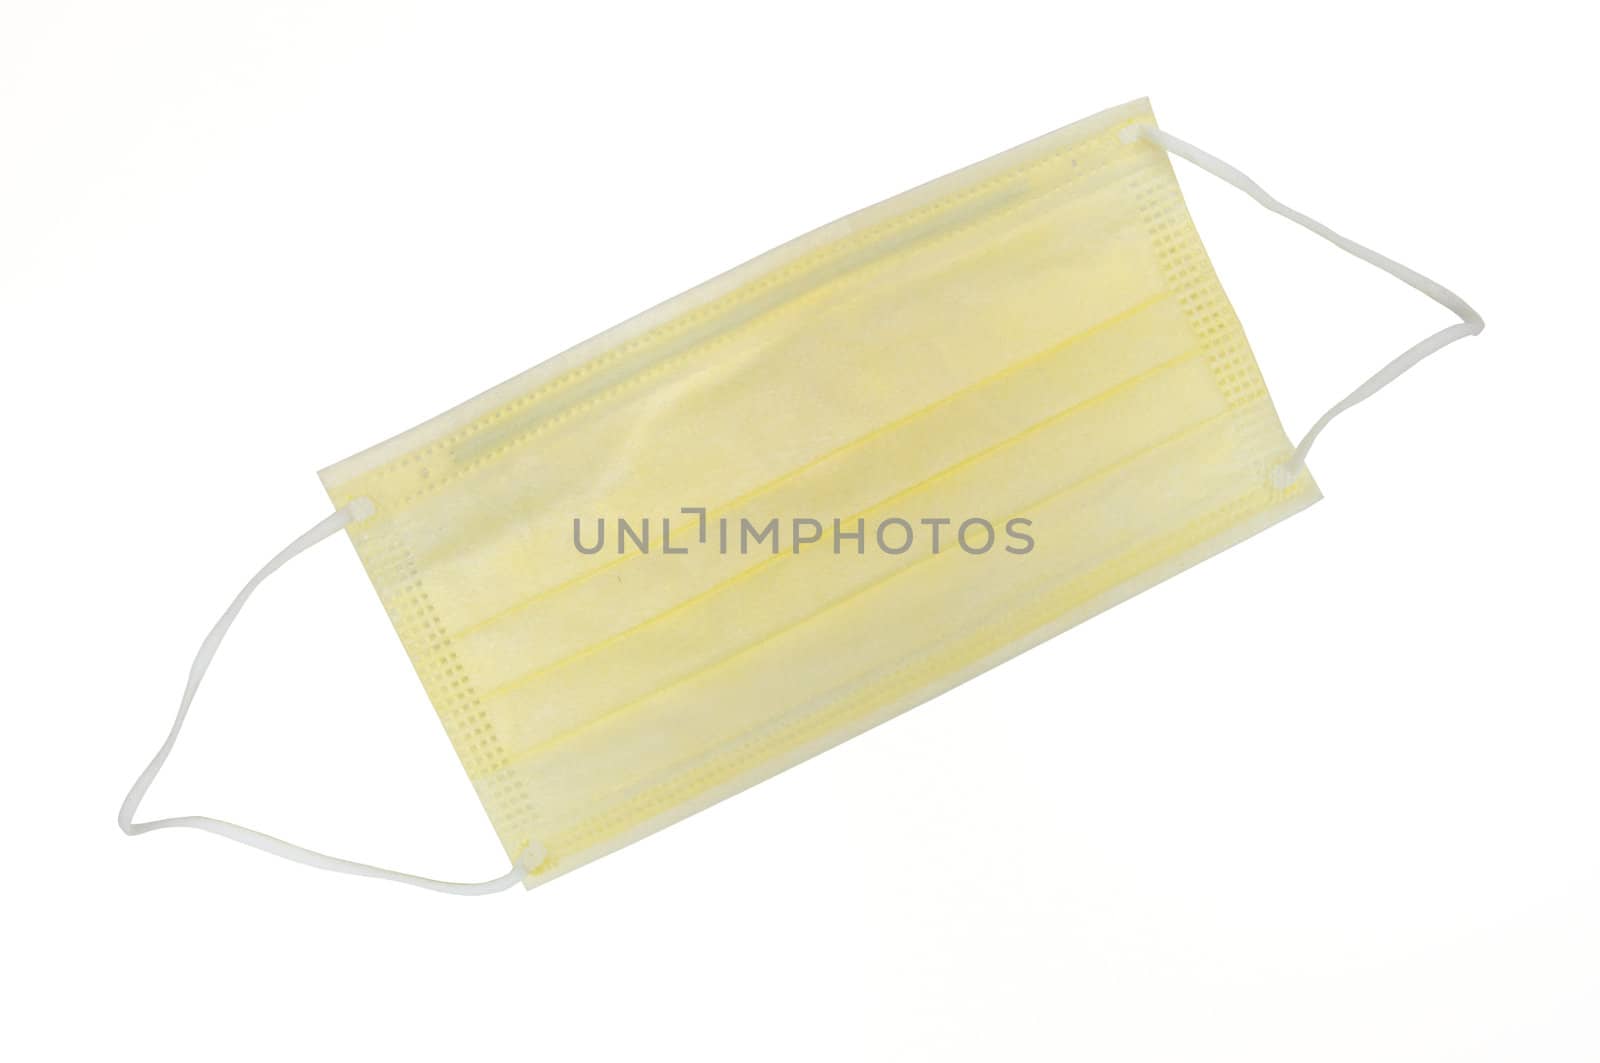 The medical mask isolated on the white background.